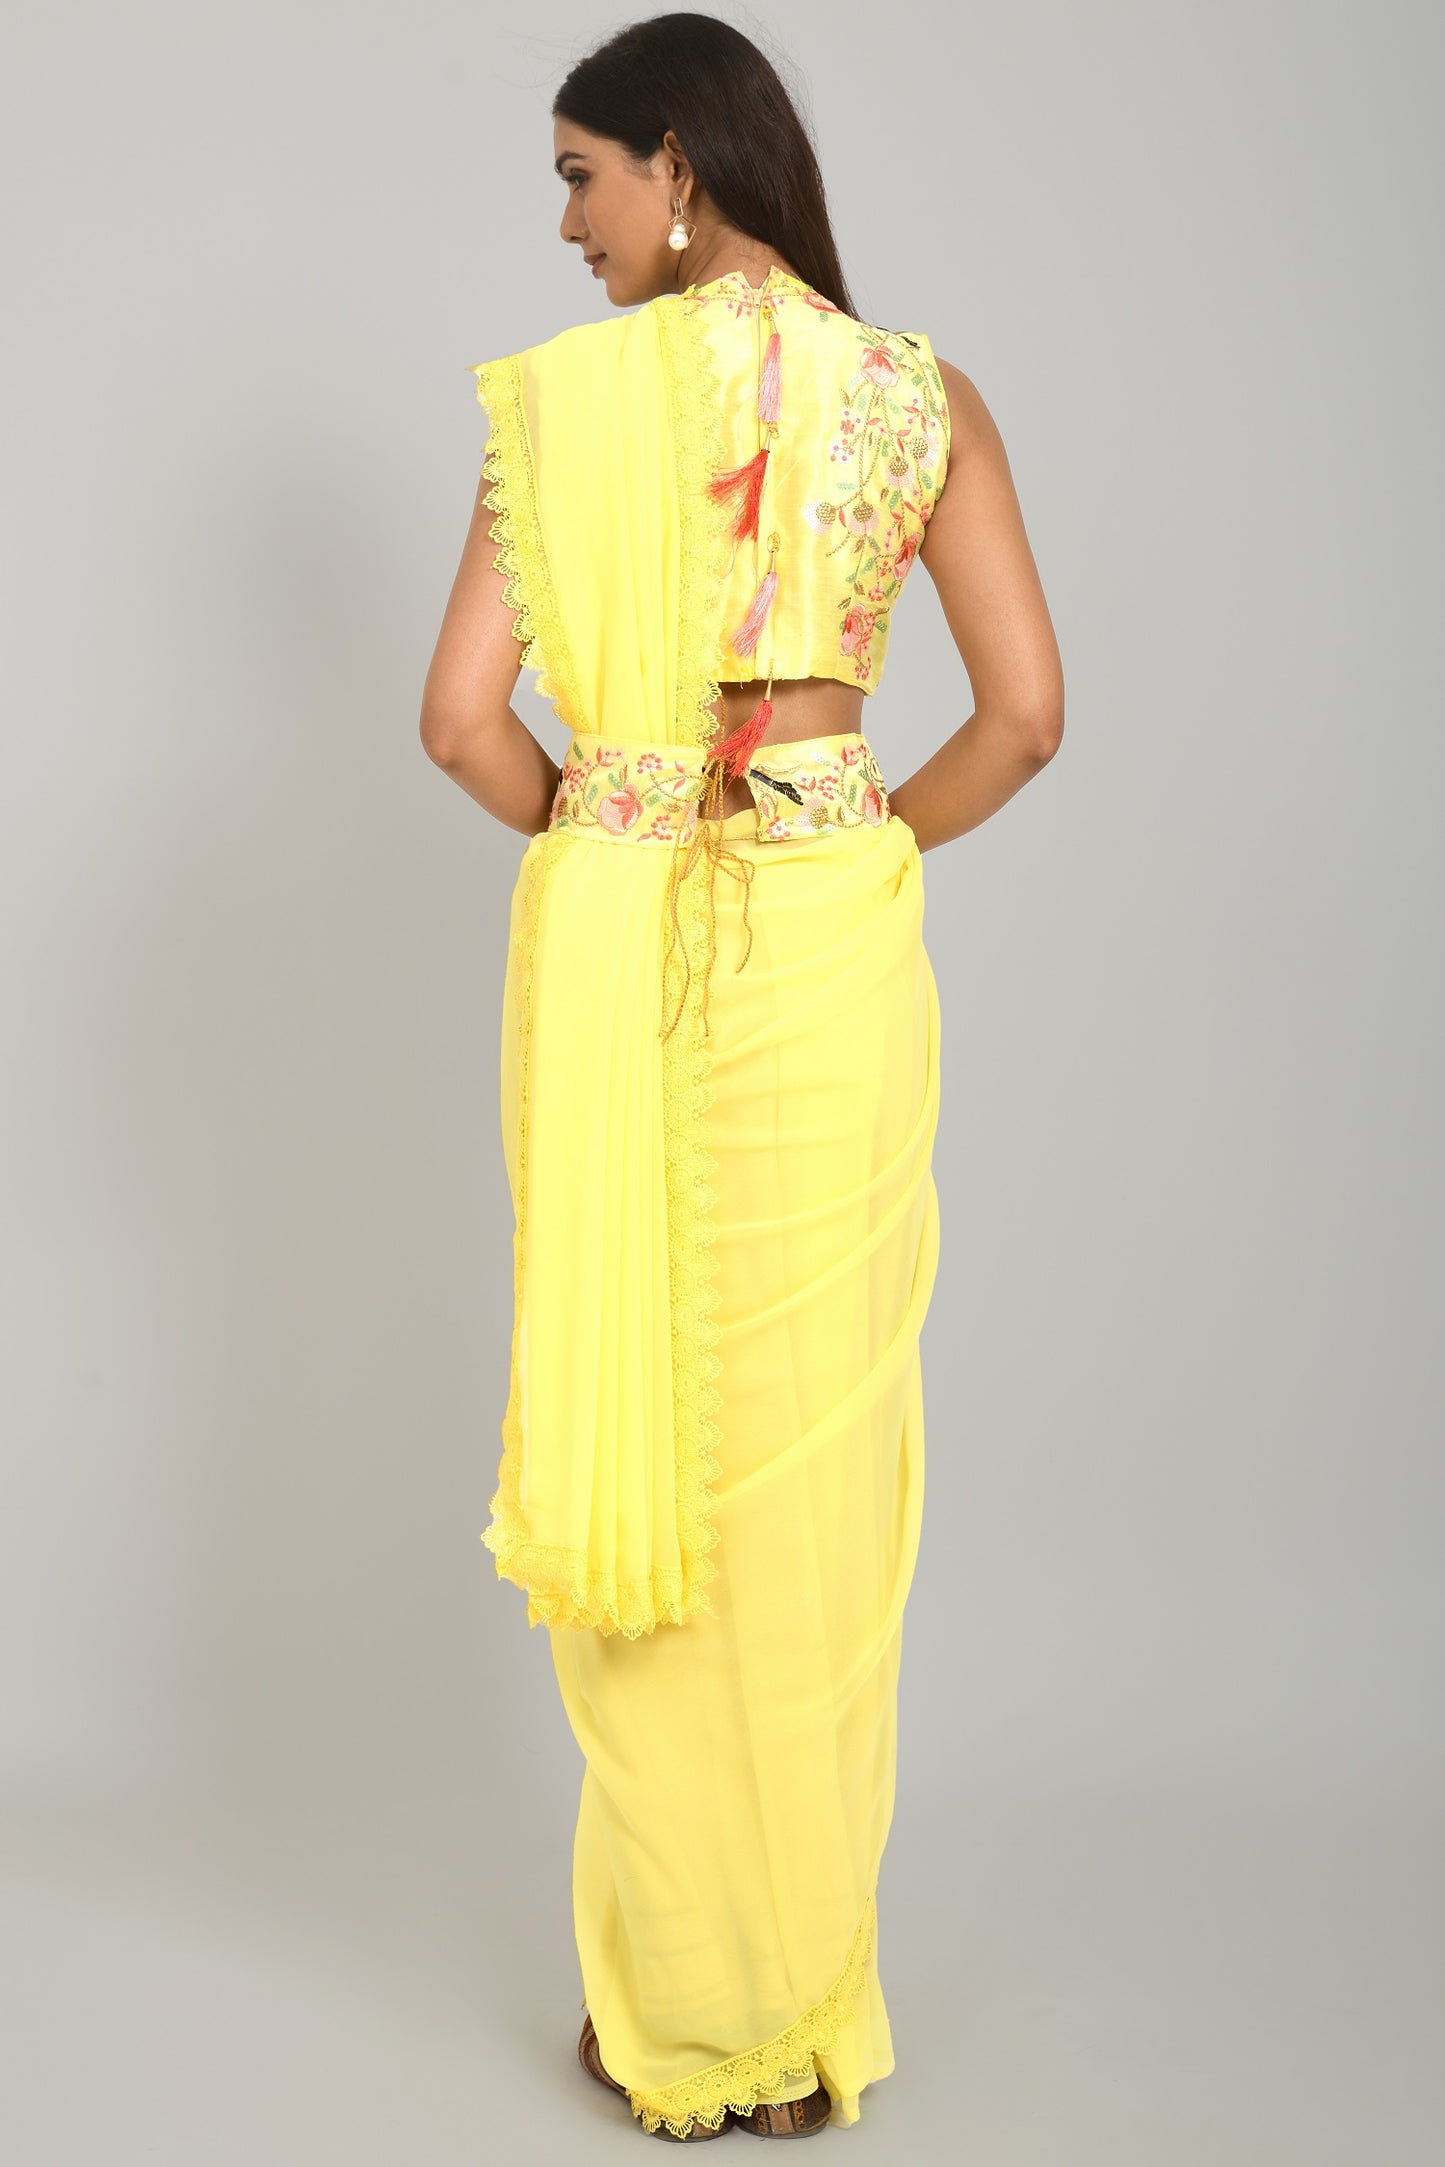 Buy Yellow Sarees Online at Best Prices In India